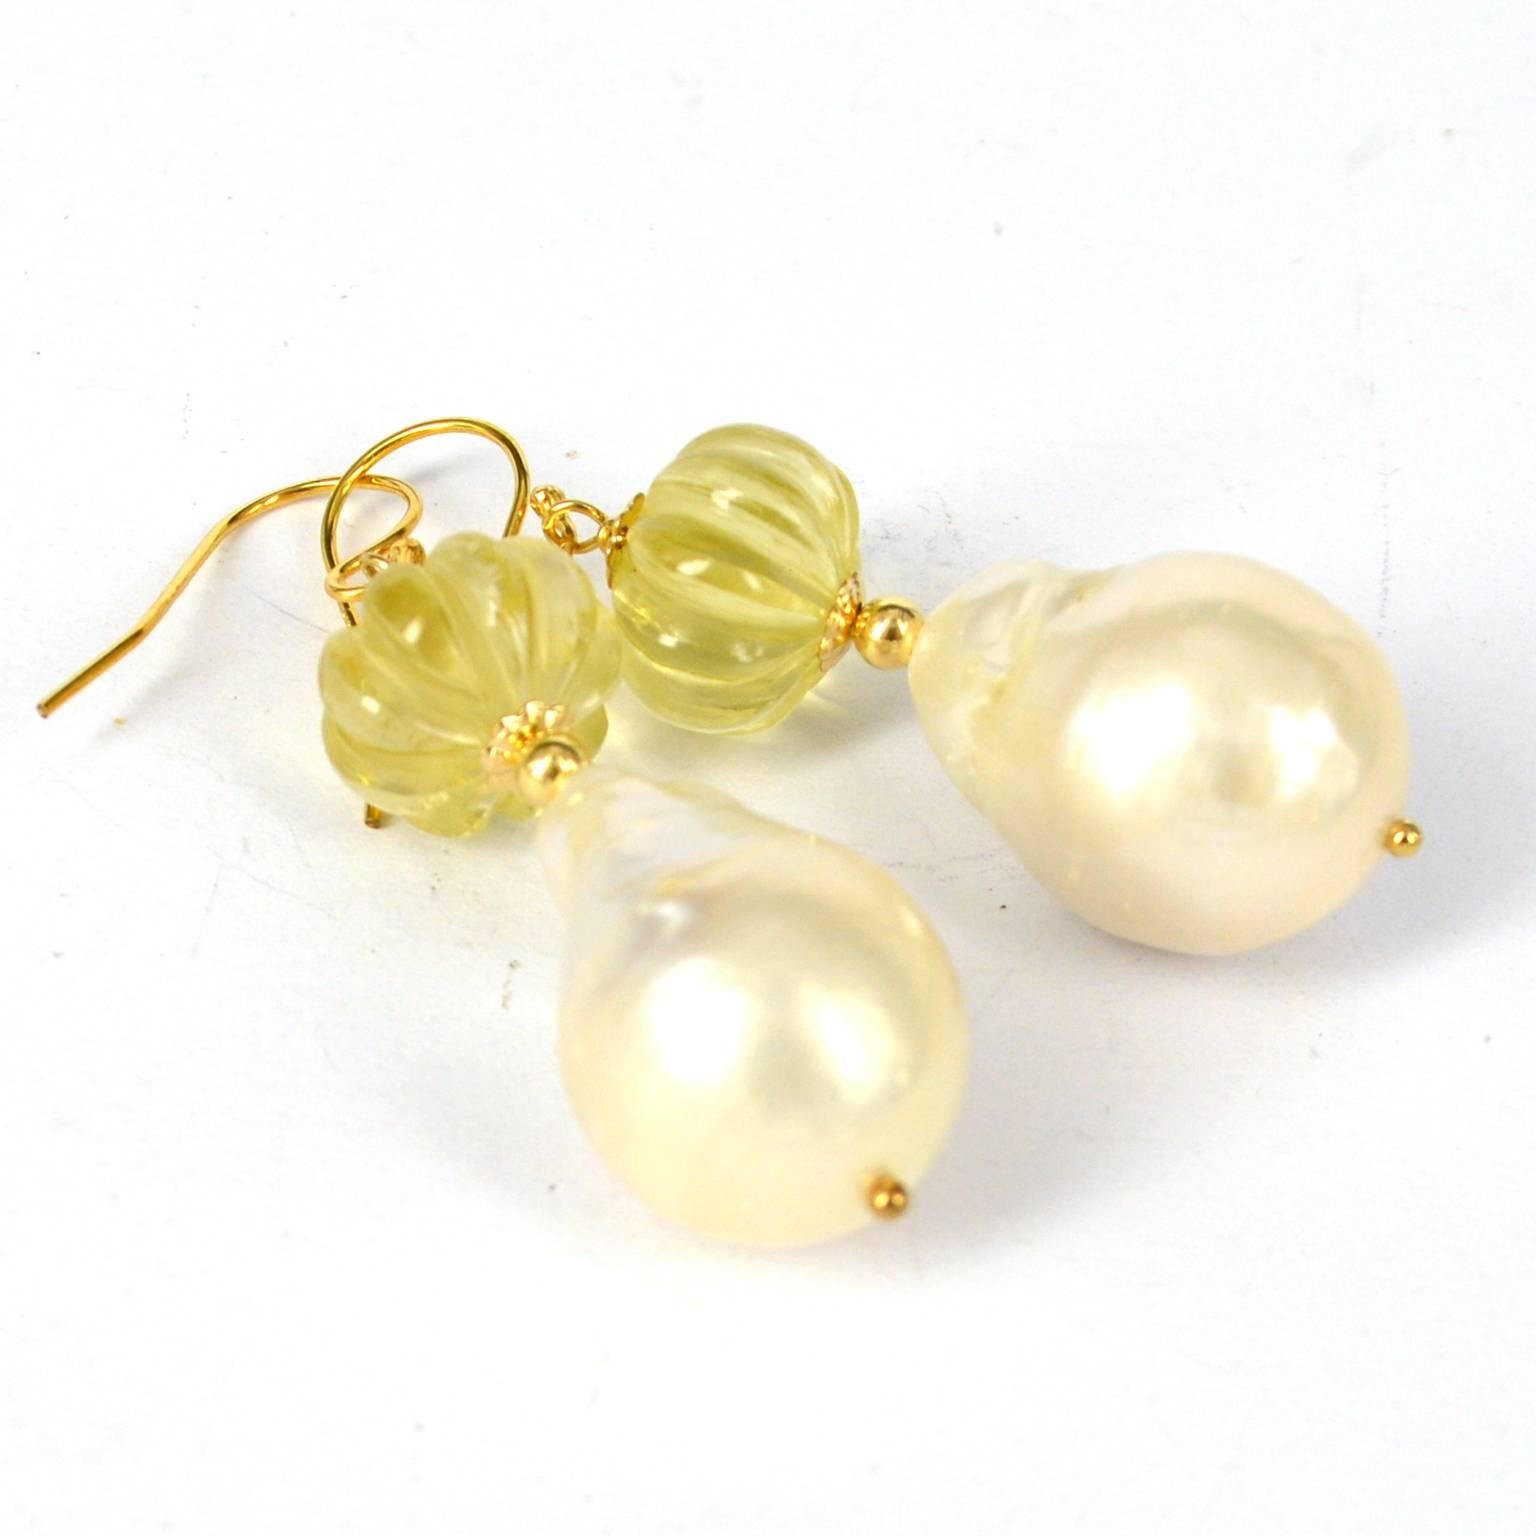 Stunning hand carved melon Shaped Lemon Quartz with a high Quality Baroque Fresh Water Pearl.
Lemon Quartz Beads measure 11x8mm with a 15x20mm Pearl.
All findings are 14k Gold Filled
length of Earrings is 48mm